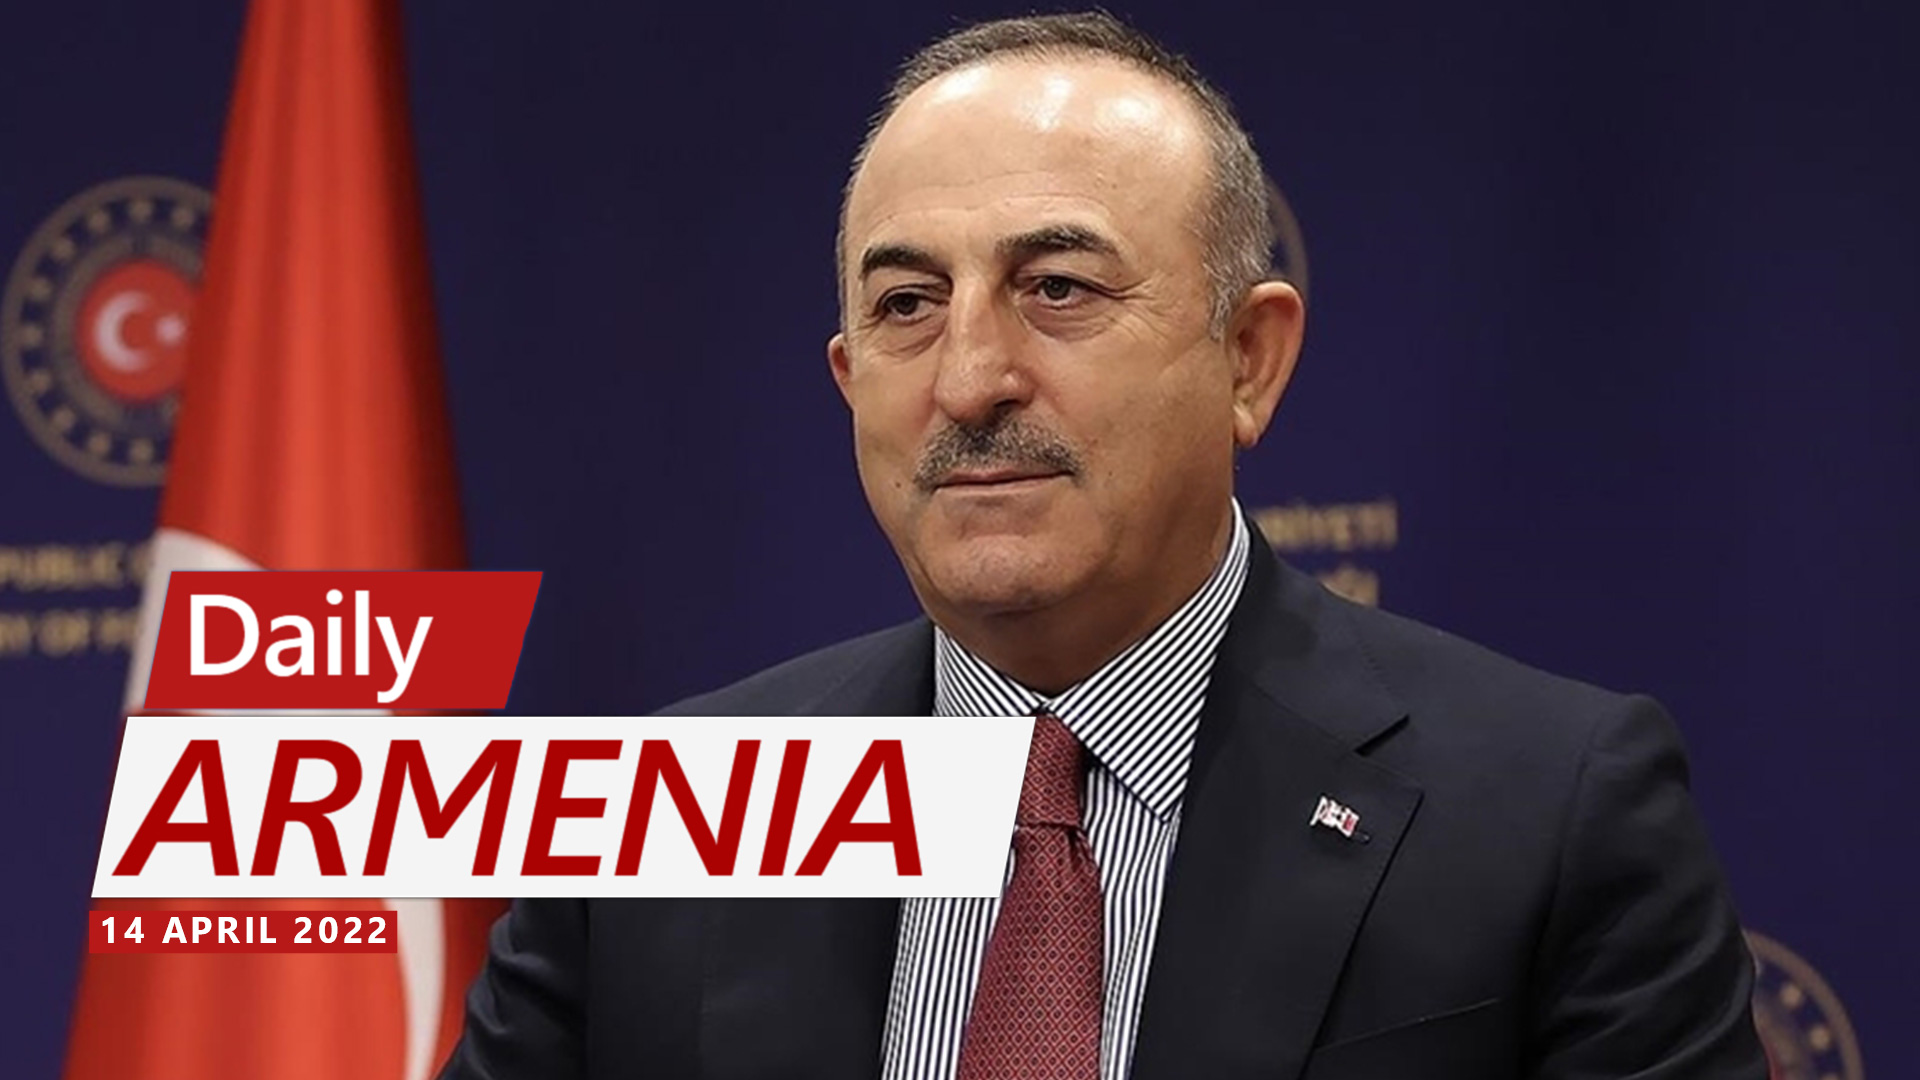 Third meeting of Armenian and Turkish special envoys will take place in Vienna, says Turkish minister